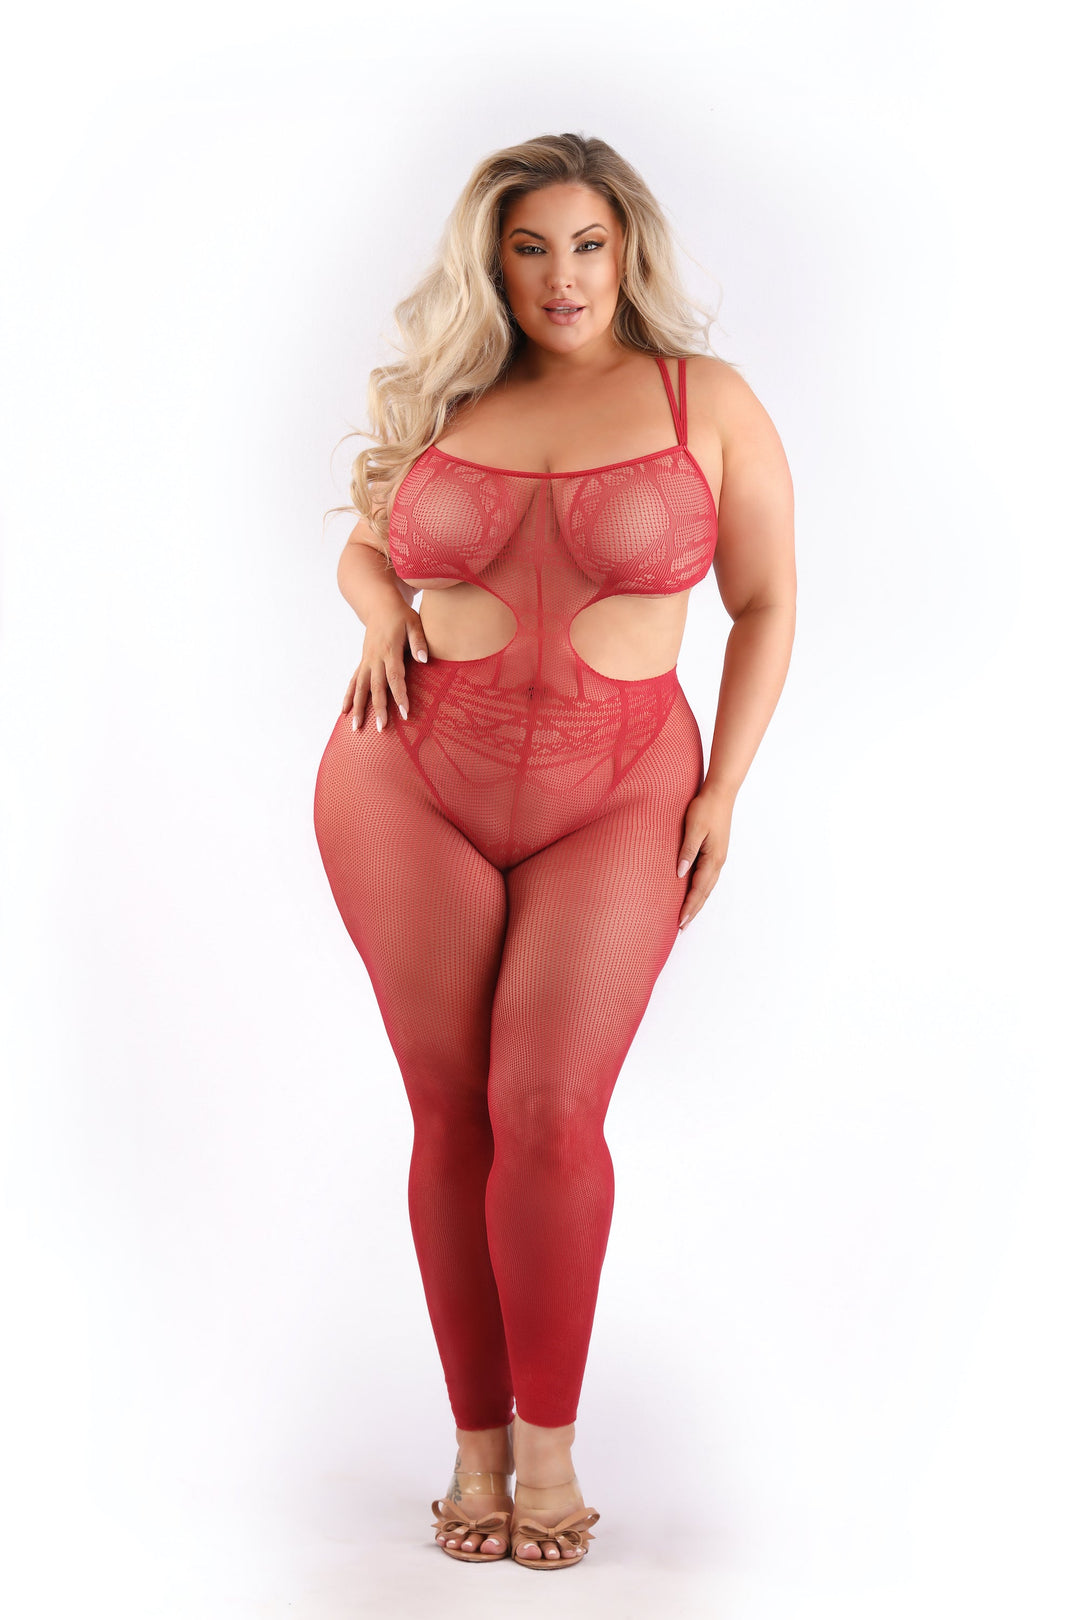 Queen Unforgettable Cut-out Bodystocking Red-Fantasy Lingerie-Rebel Romance